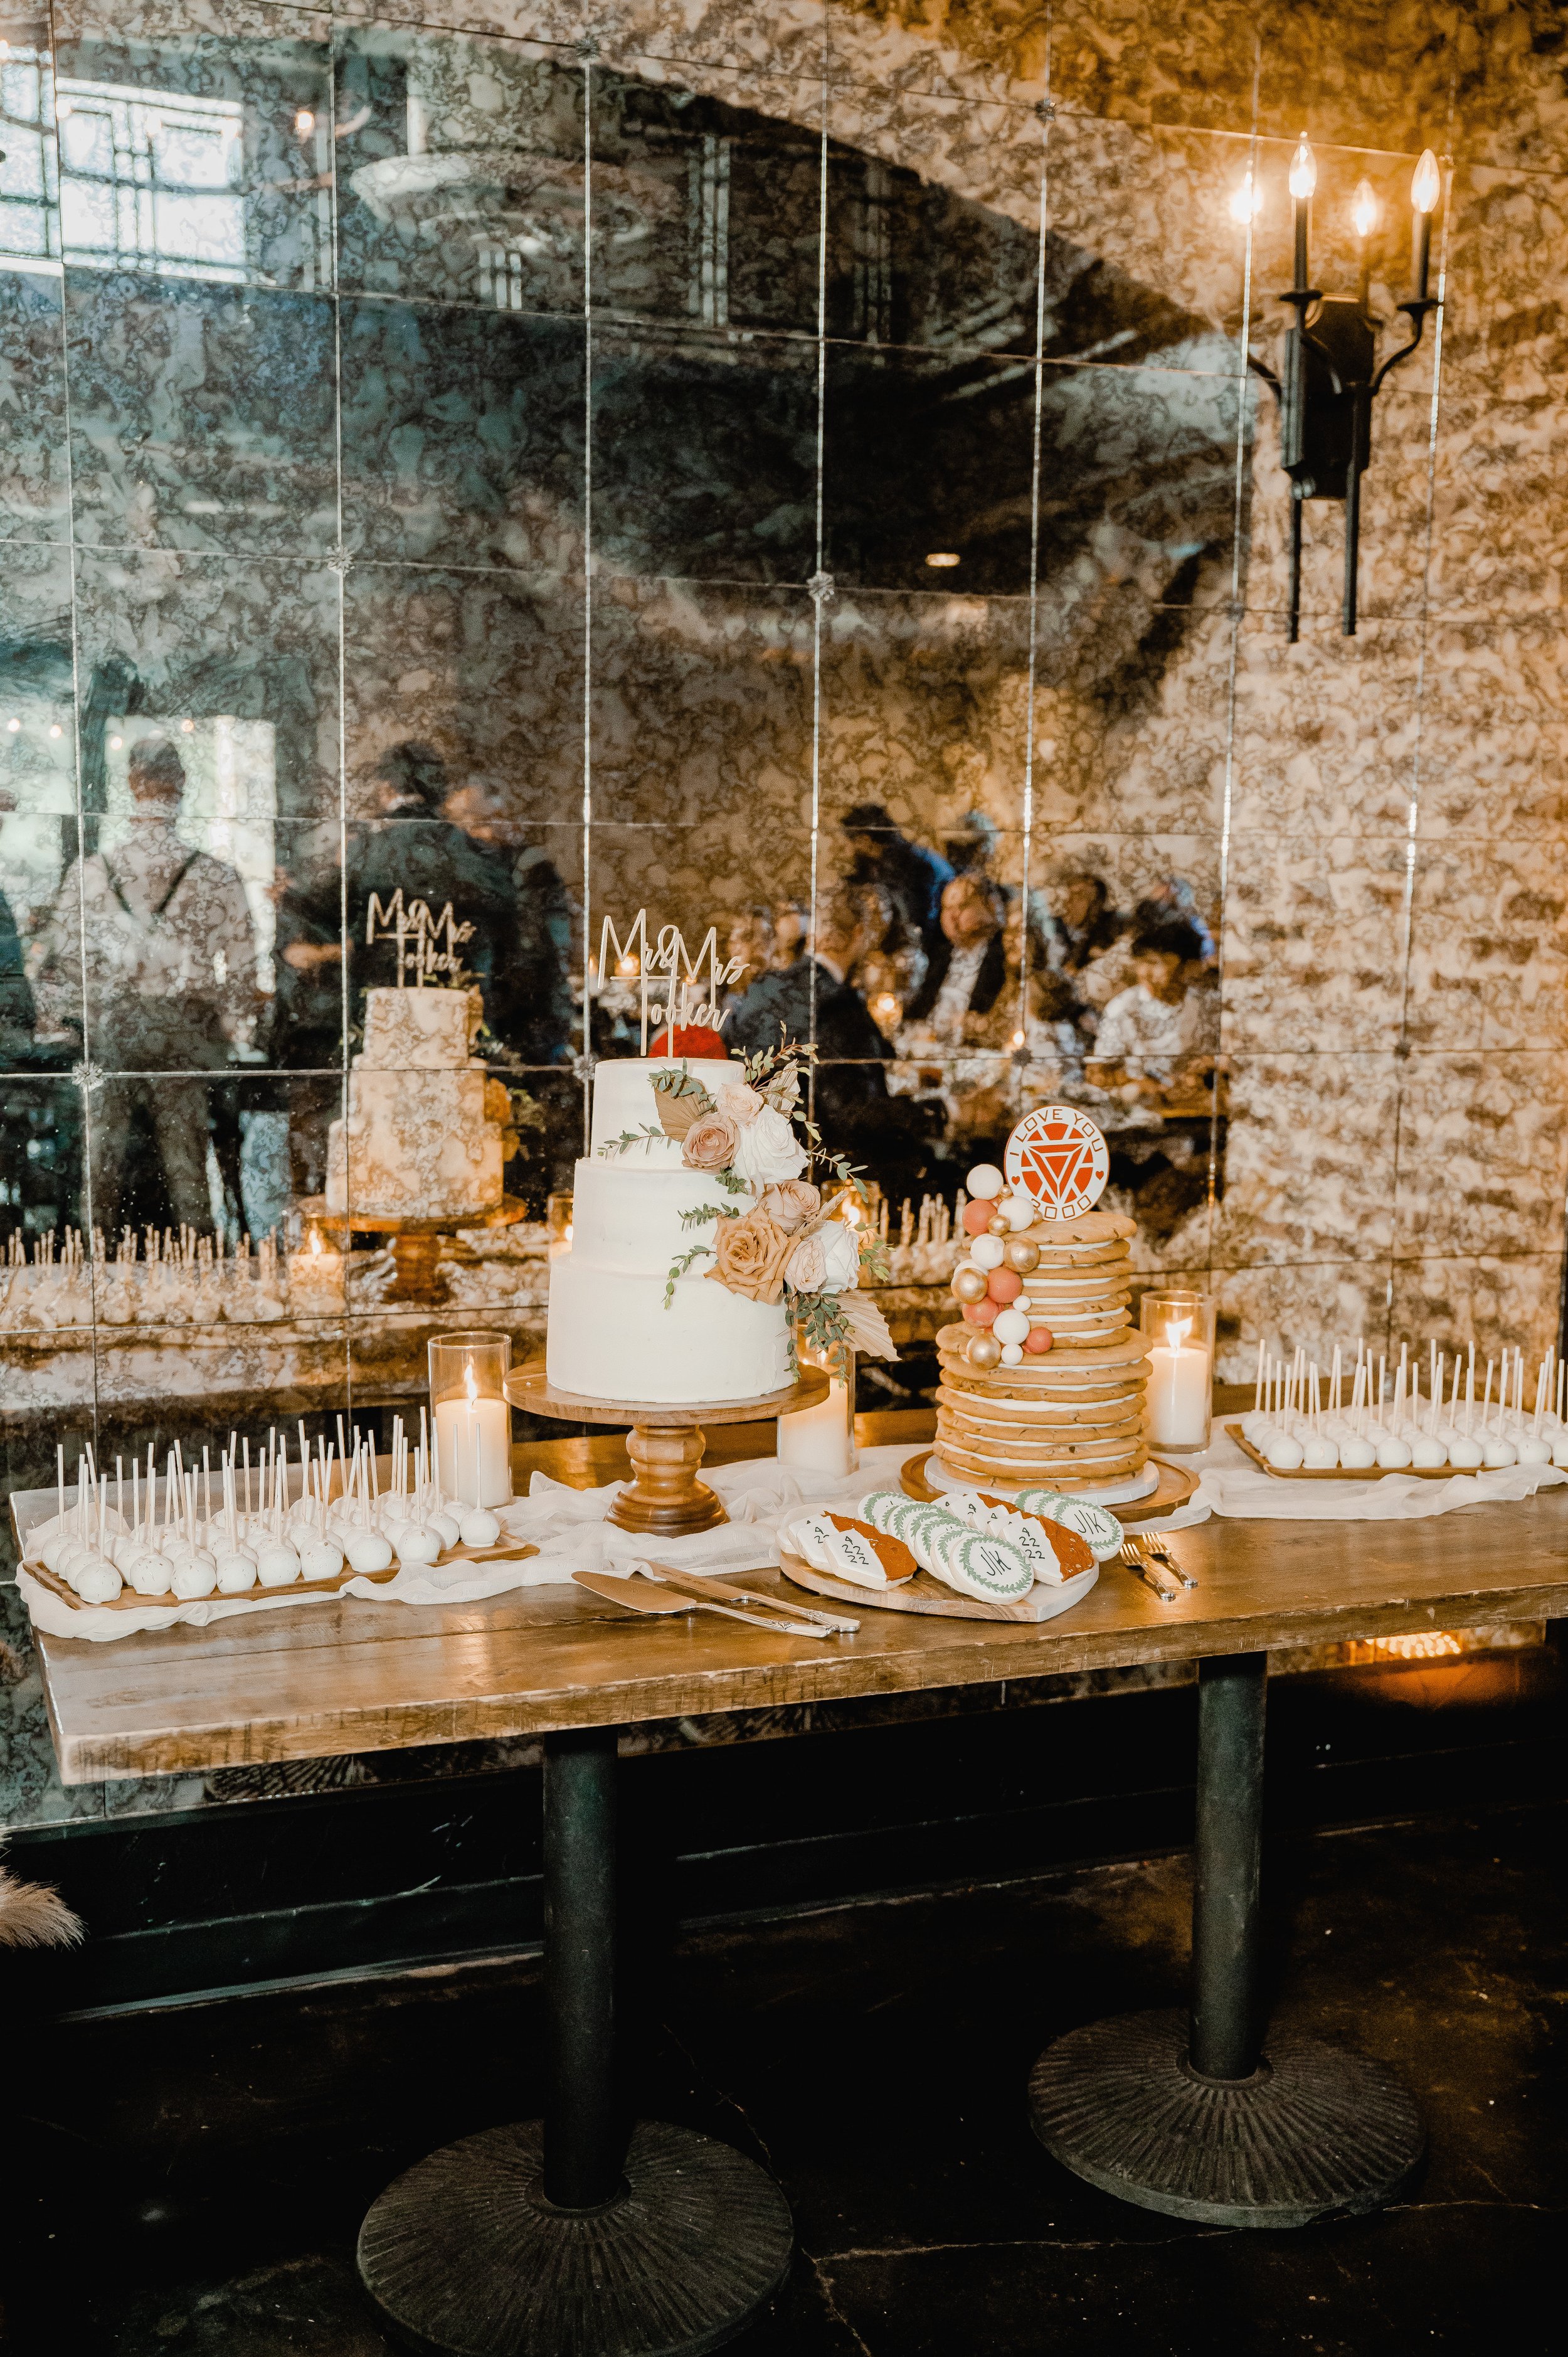 a rustic and classy dessert table with an assortment of desserts for this modern wedding in texas.